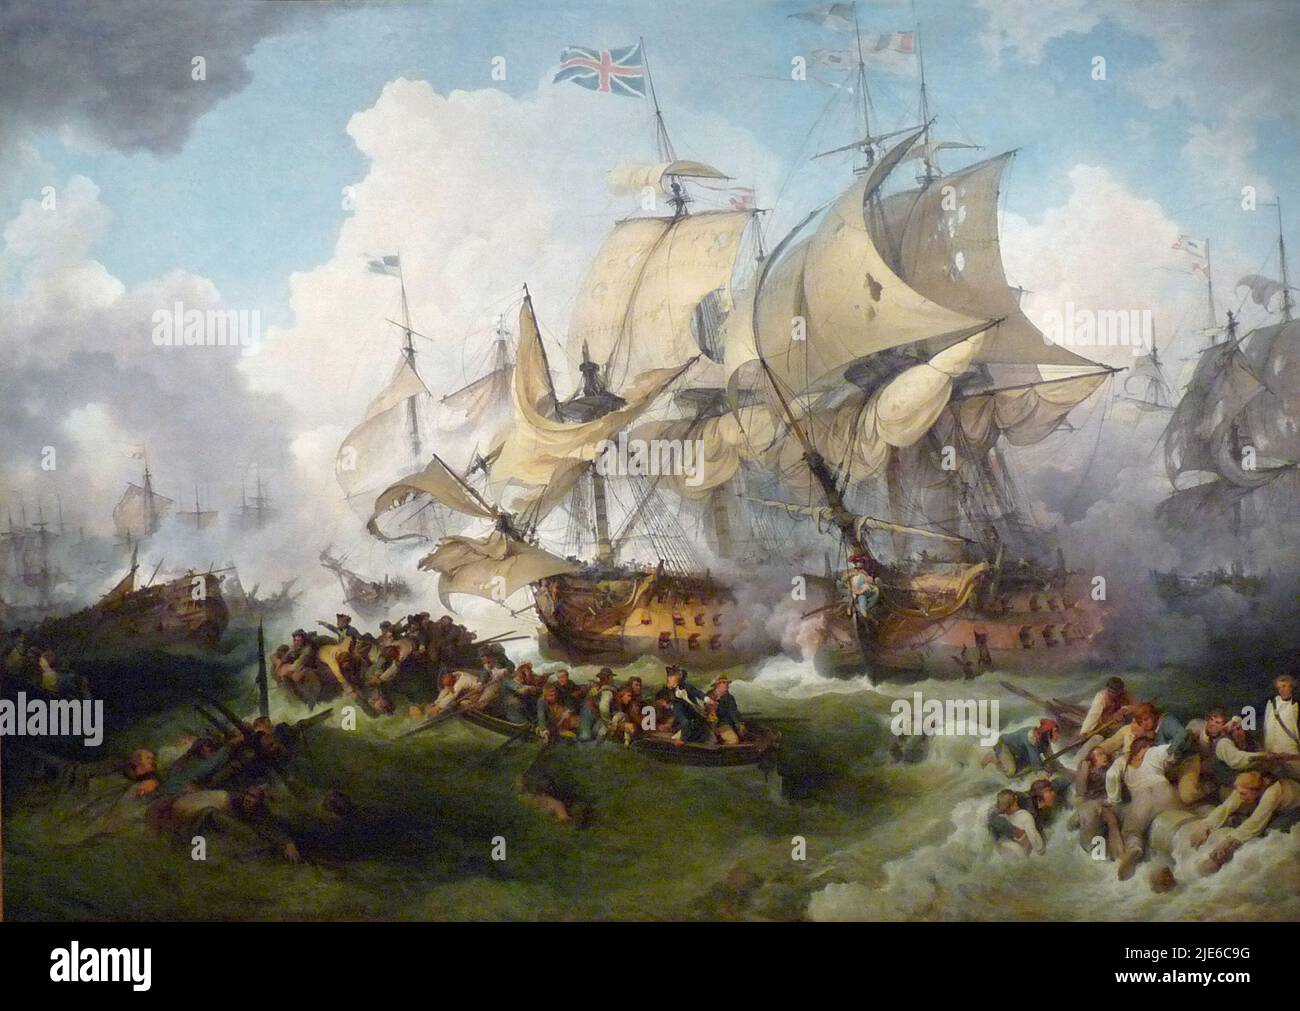 Glorious First of June (1 June 1794), also known as the Fourth Battle of Ushant painted by Philip James de Loutherbourg. This was the largest naval battle in the War of the First Coalition and resulted in a defeat for the French. Stock Photo